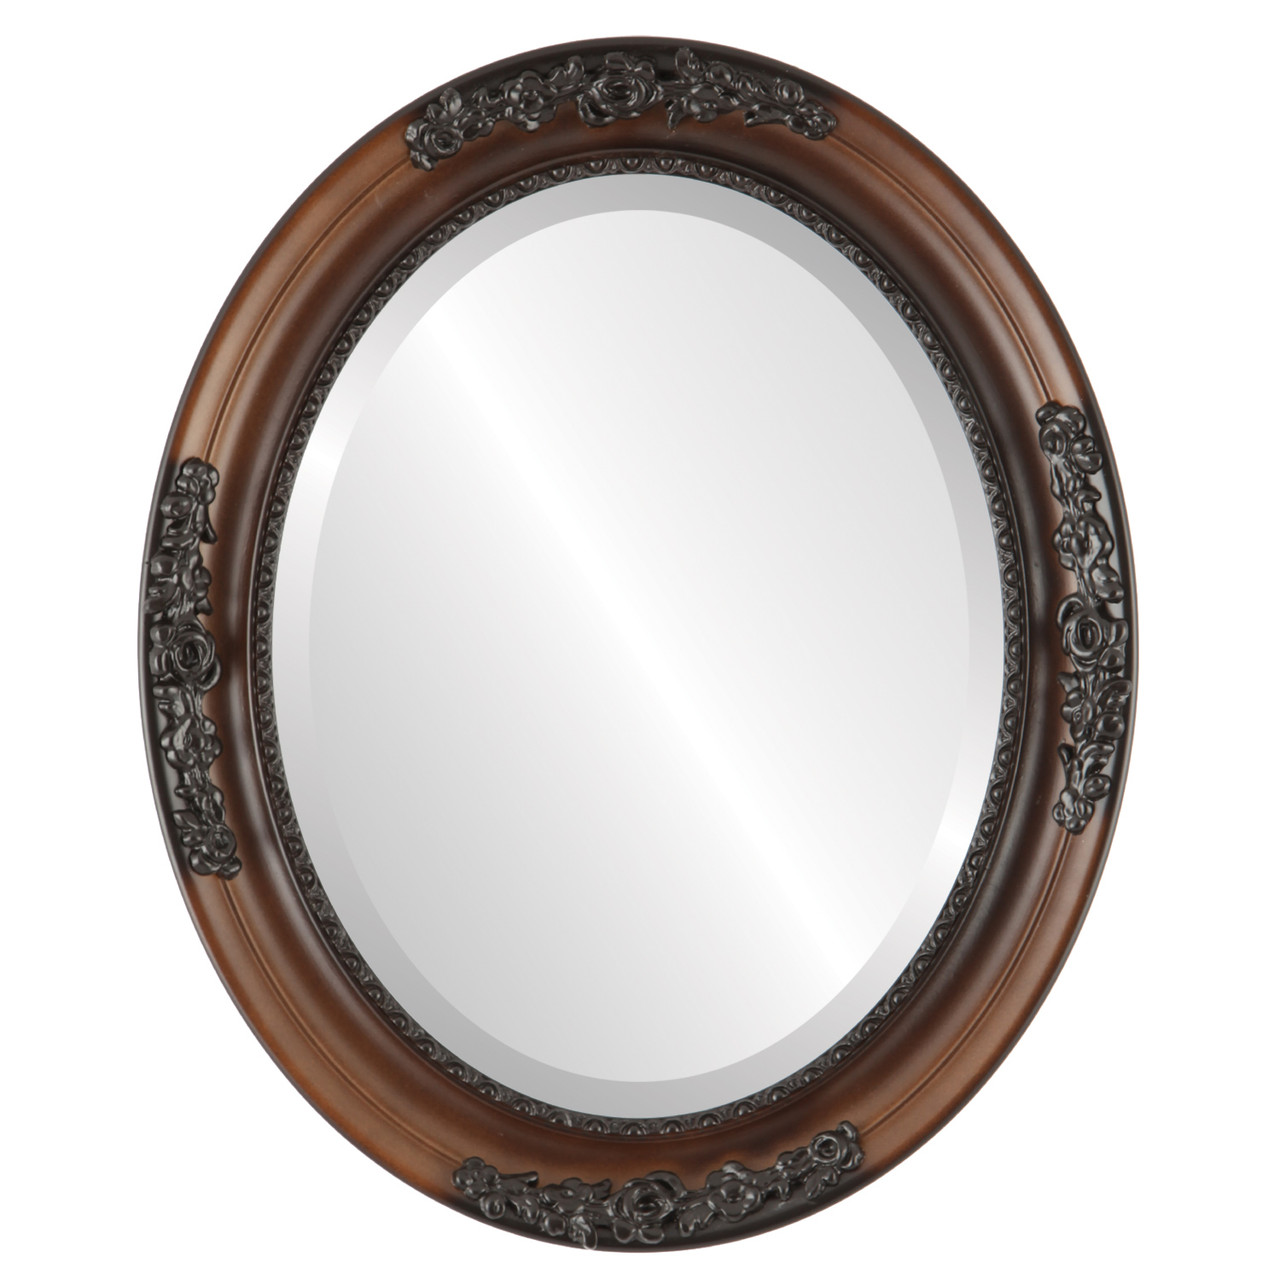 Vintage Brown Oval Mirrors from $146 Free Shipping